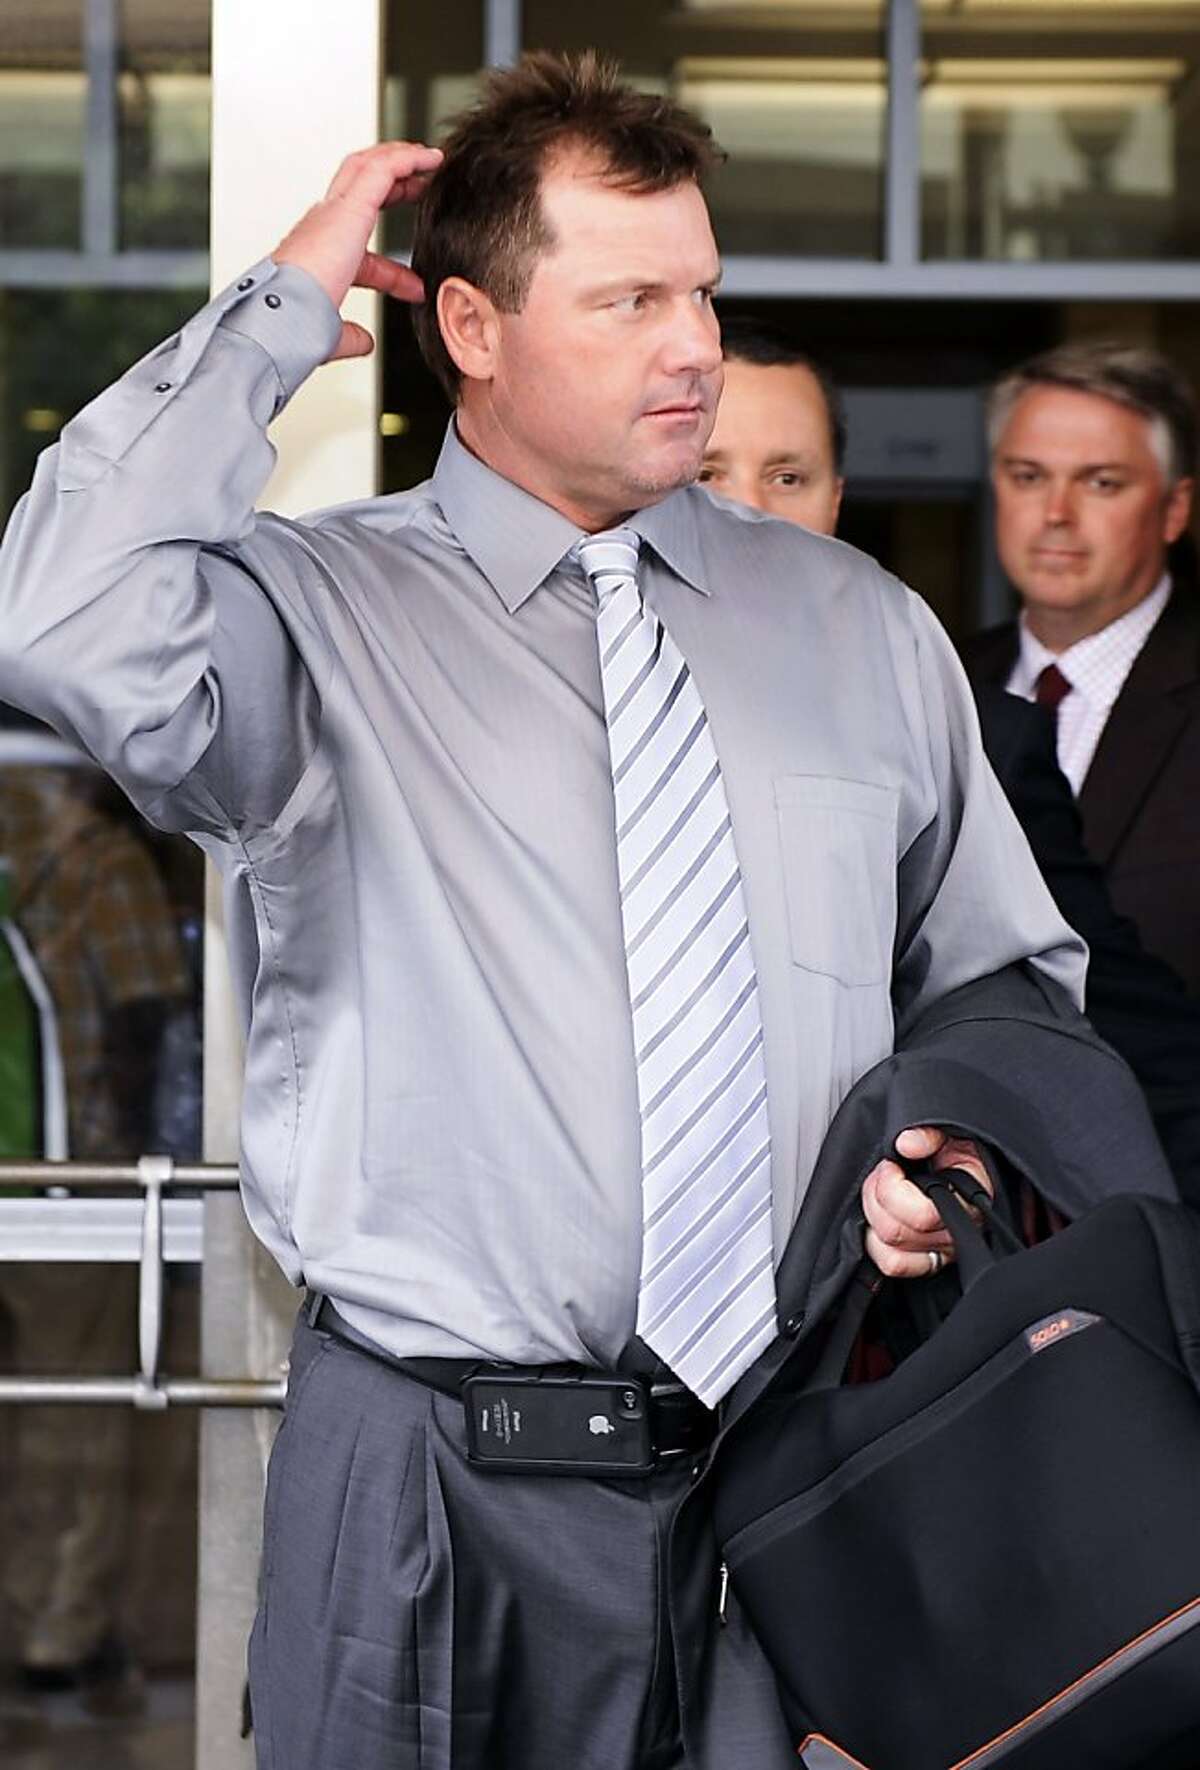 Former Major League Baseball pitcher Roger Clemens exits the federal court in Washington, Wednesday, July 6, 2011, where he is on trial on charges of lying to Congress in 2008 when he denied ever using performance-enhancing drugs during his 23-year career.